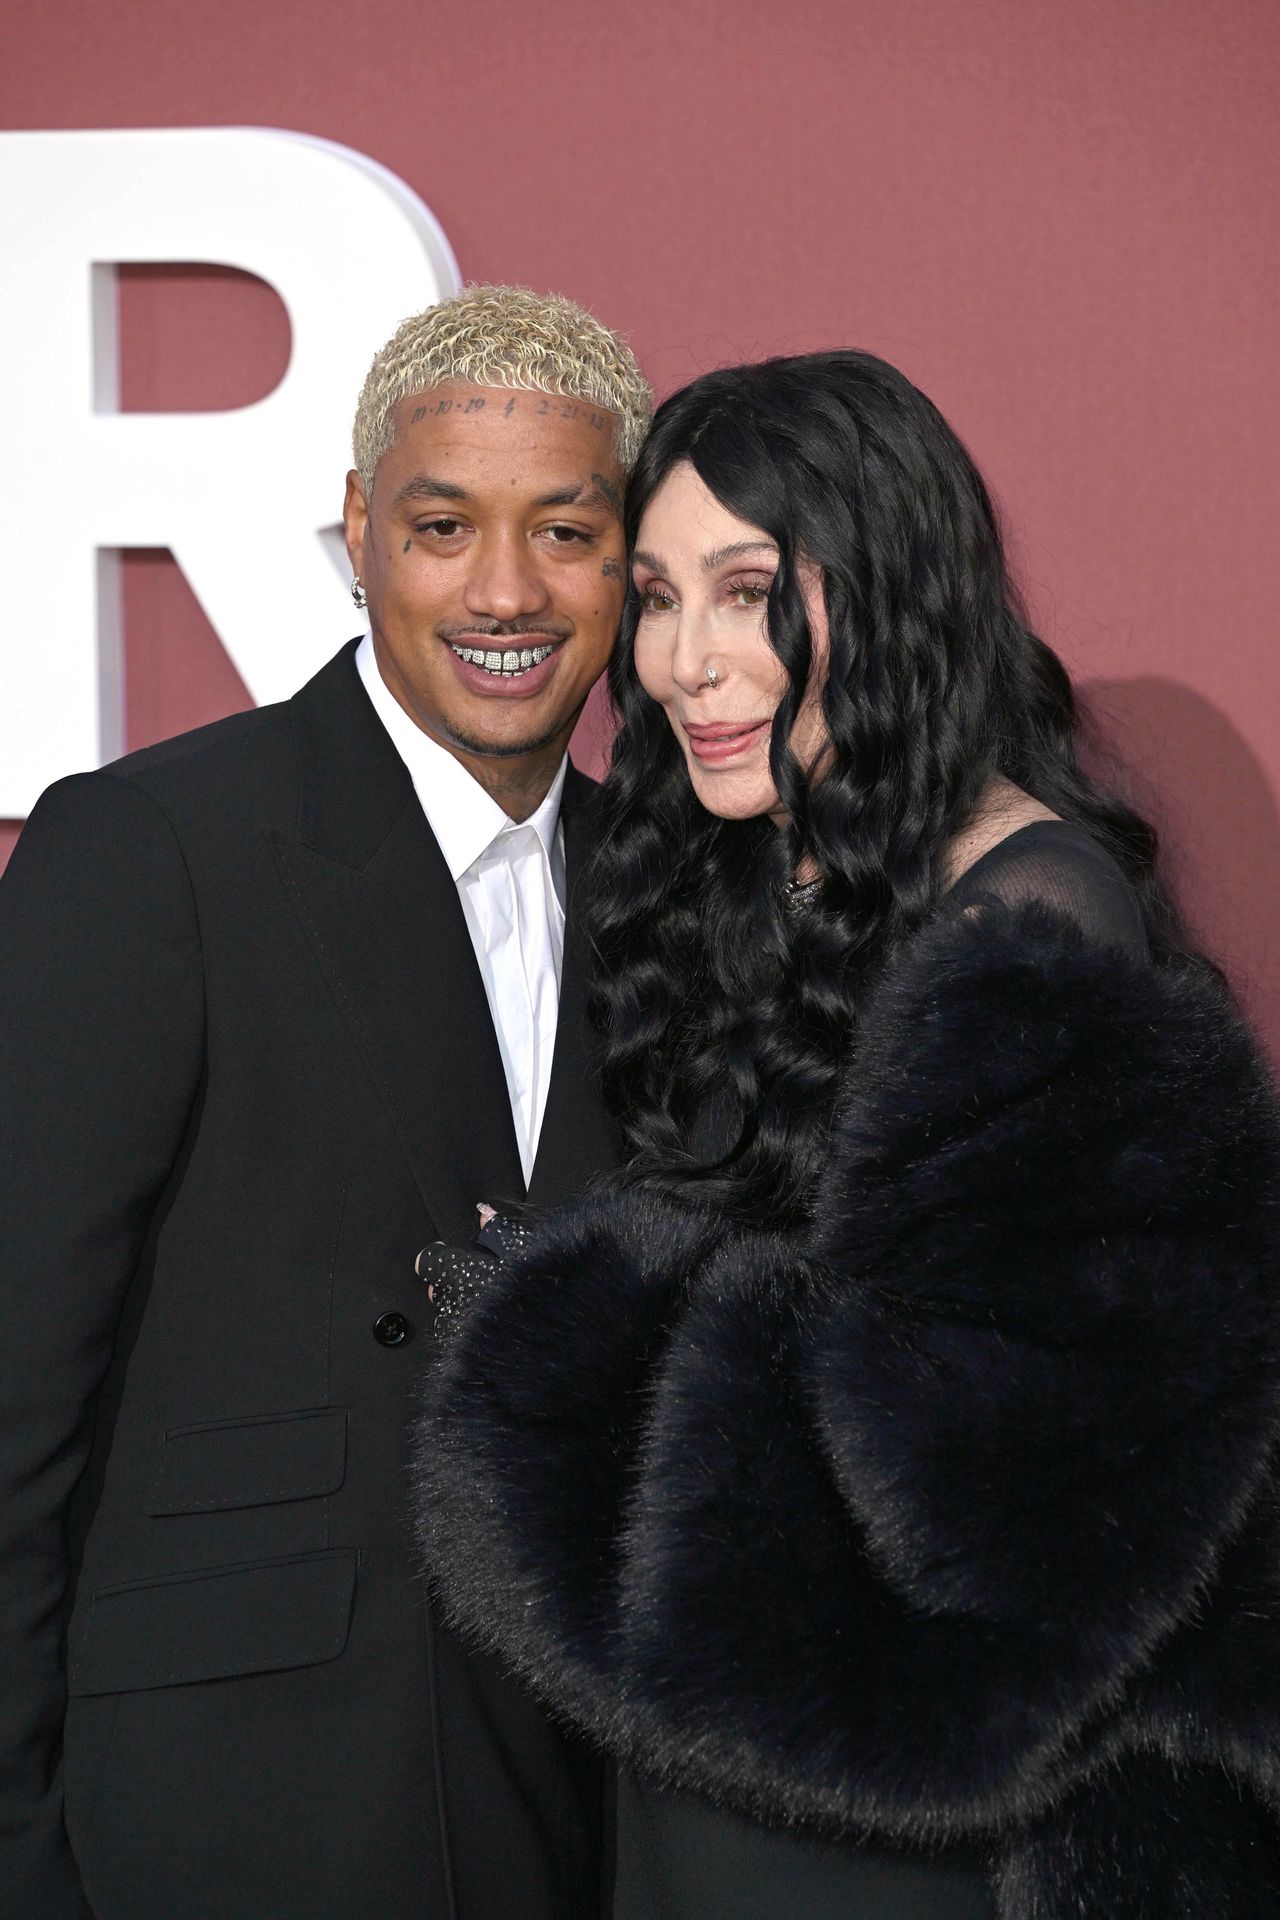 38-year-old partner of Cher calls his beloved a "B*TCH"